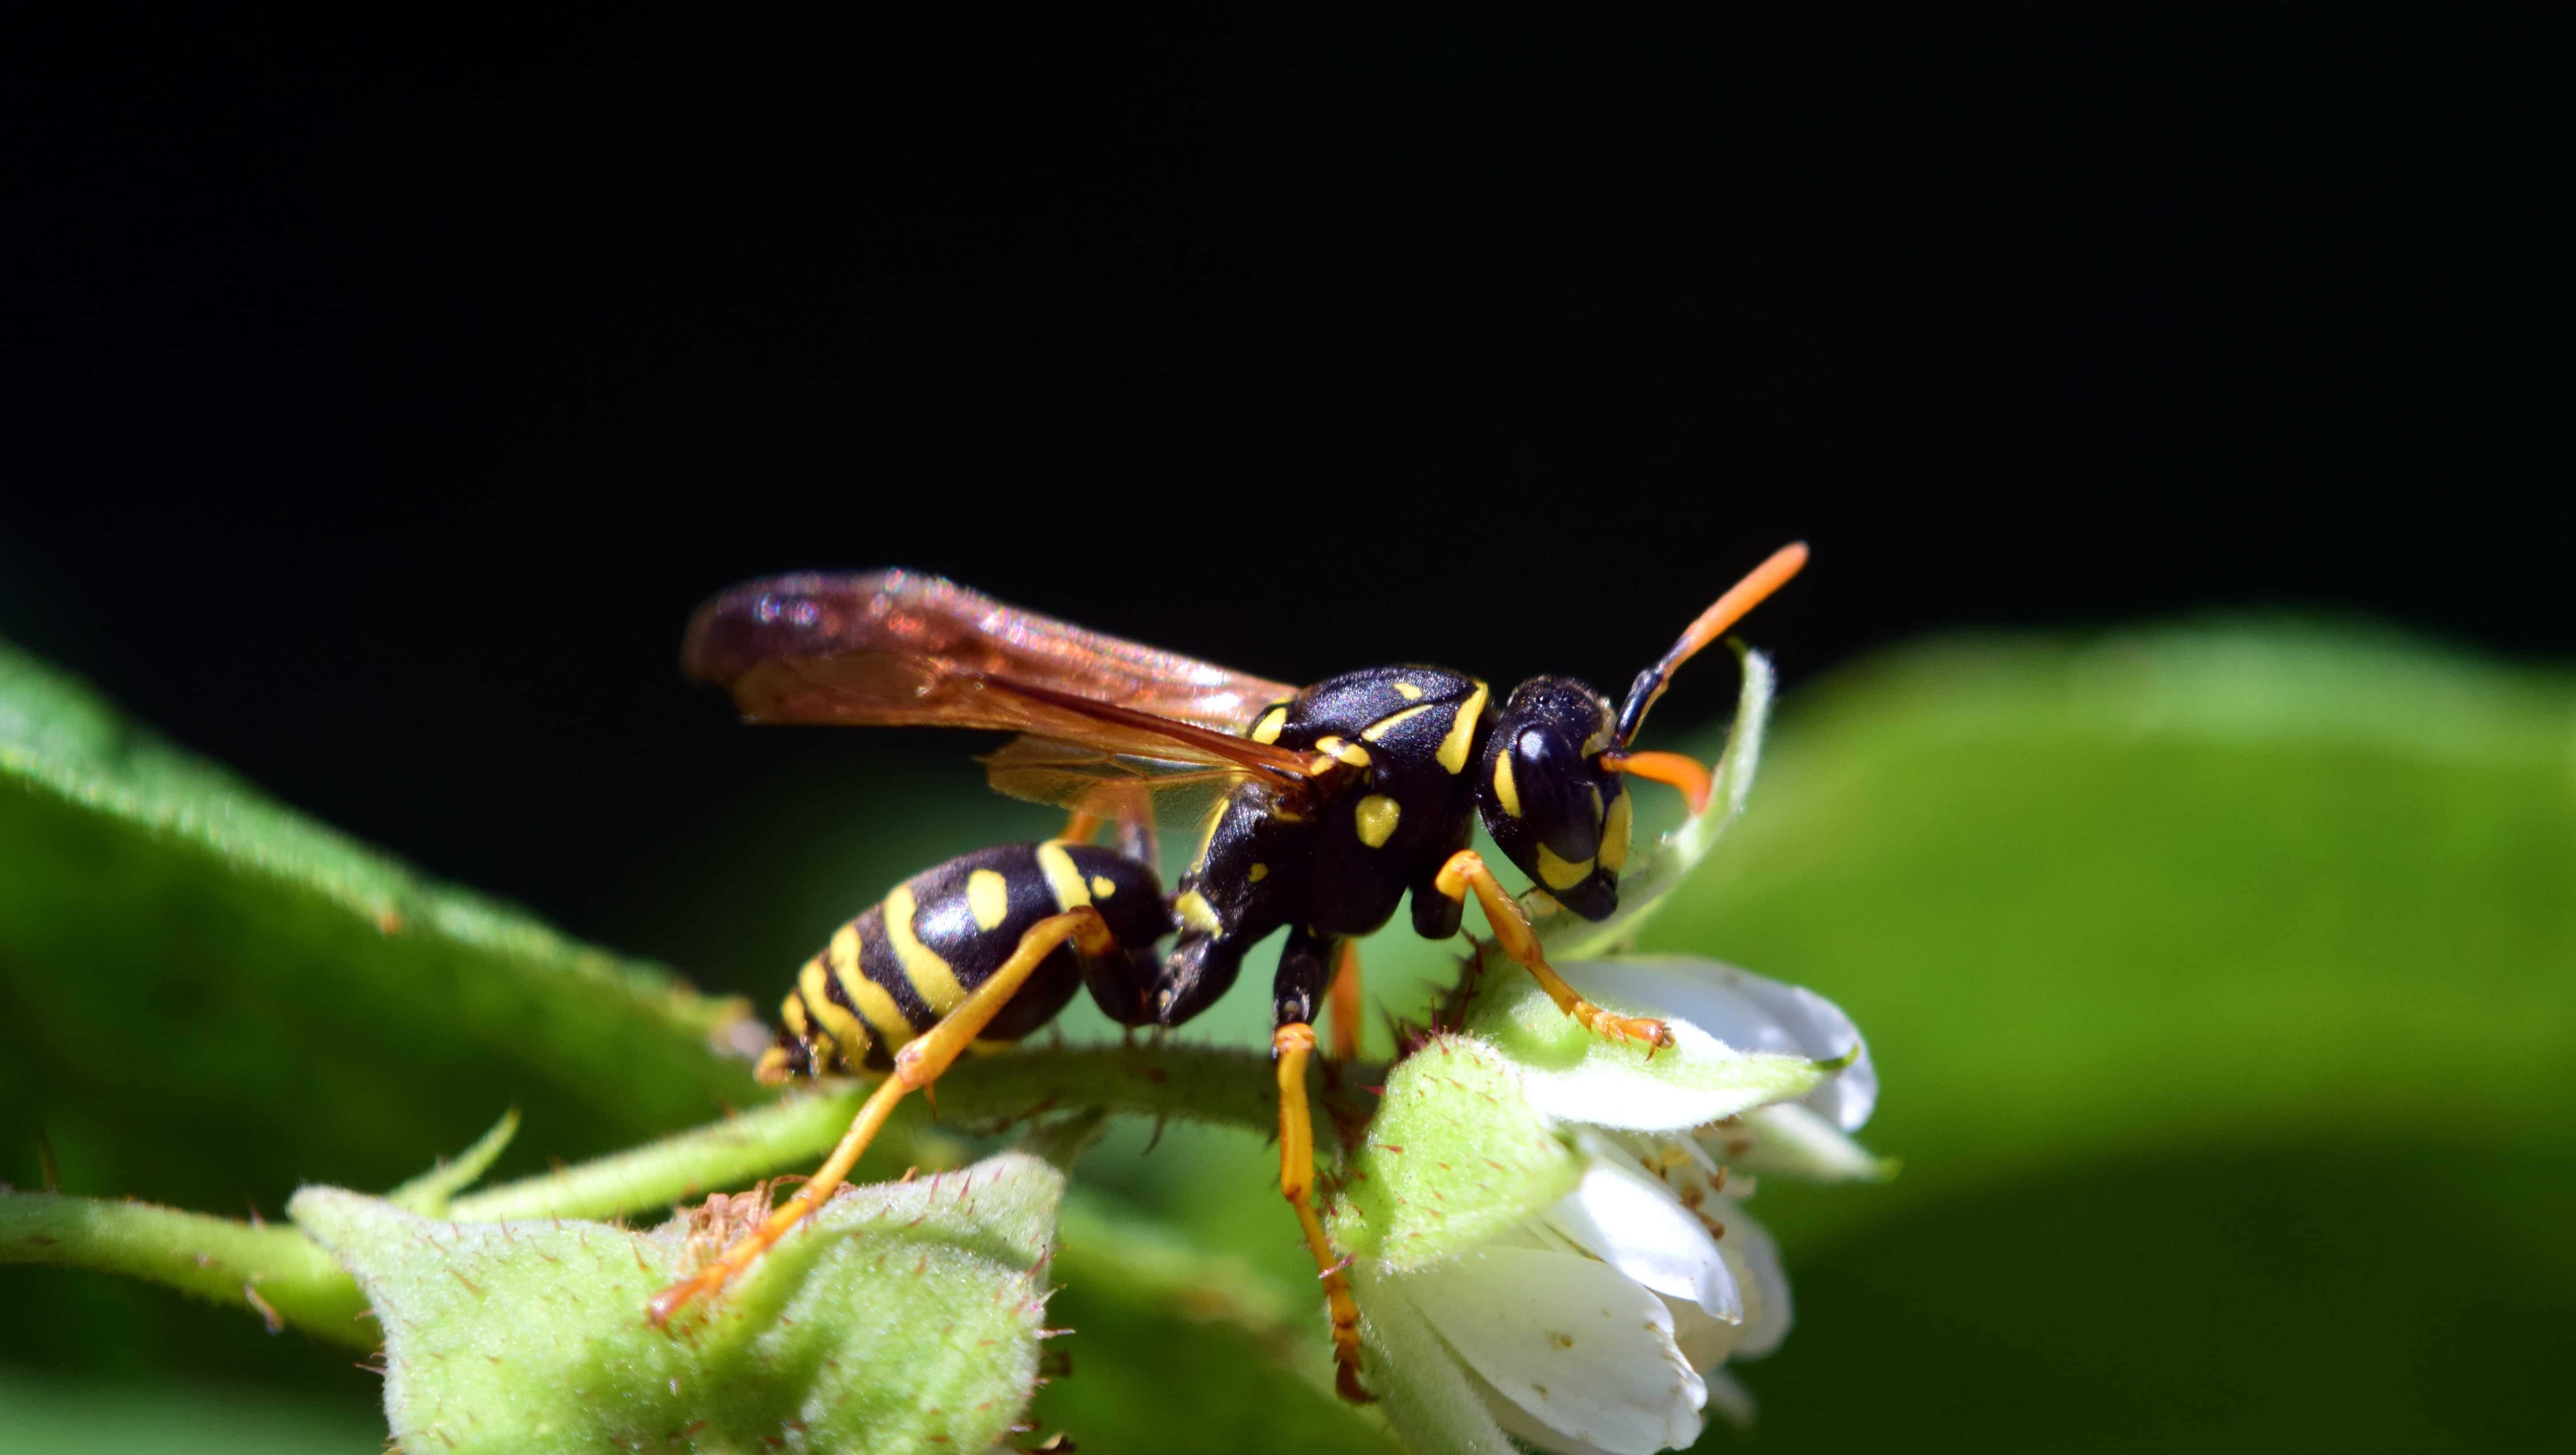 Free picture: insect, invertebrate, animal, wildlife, nature, wasp ...